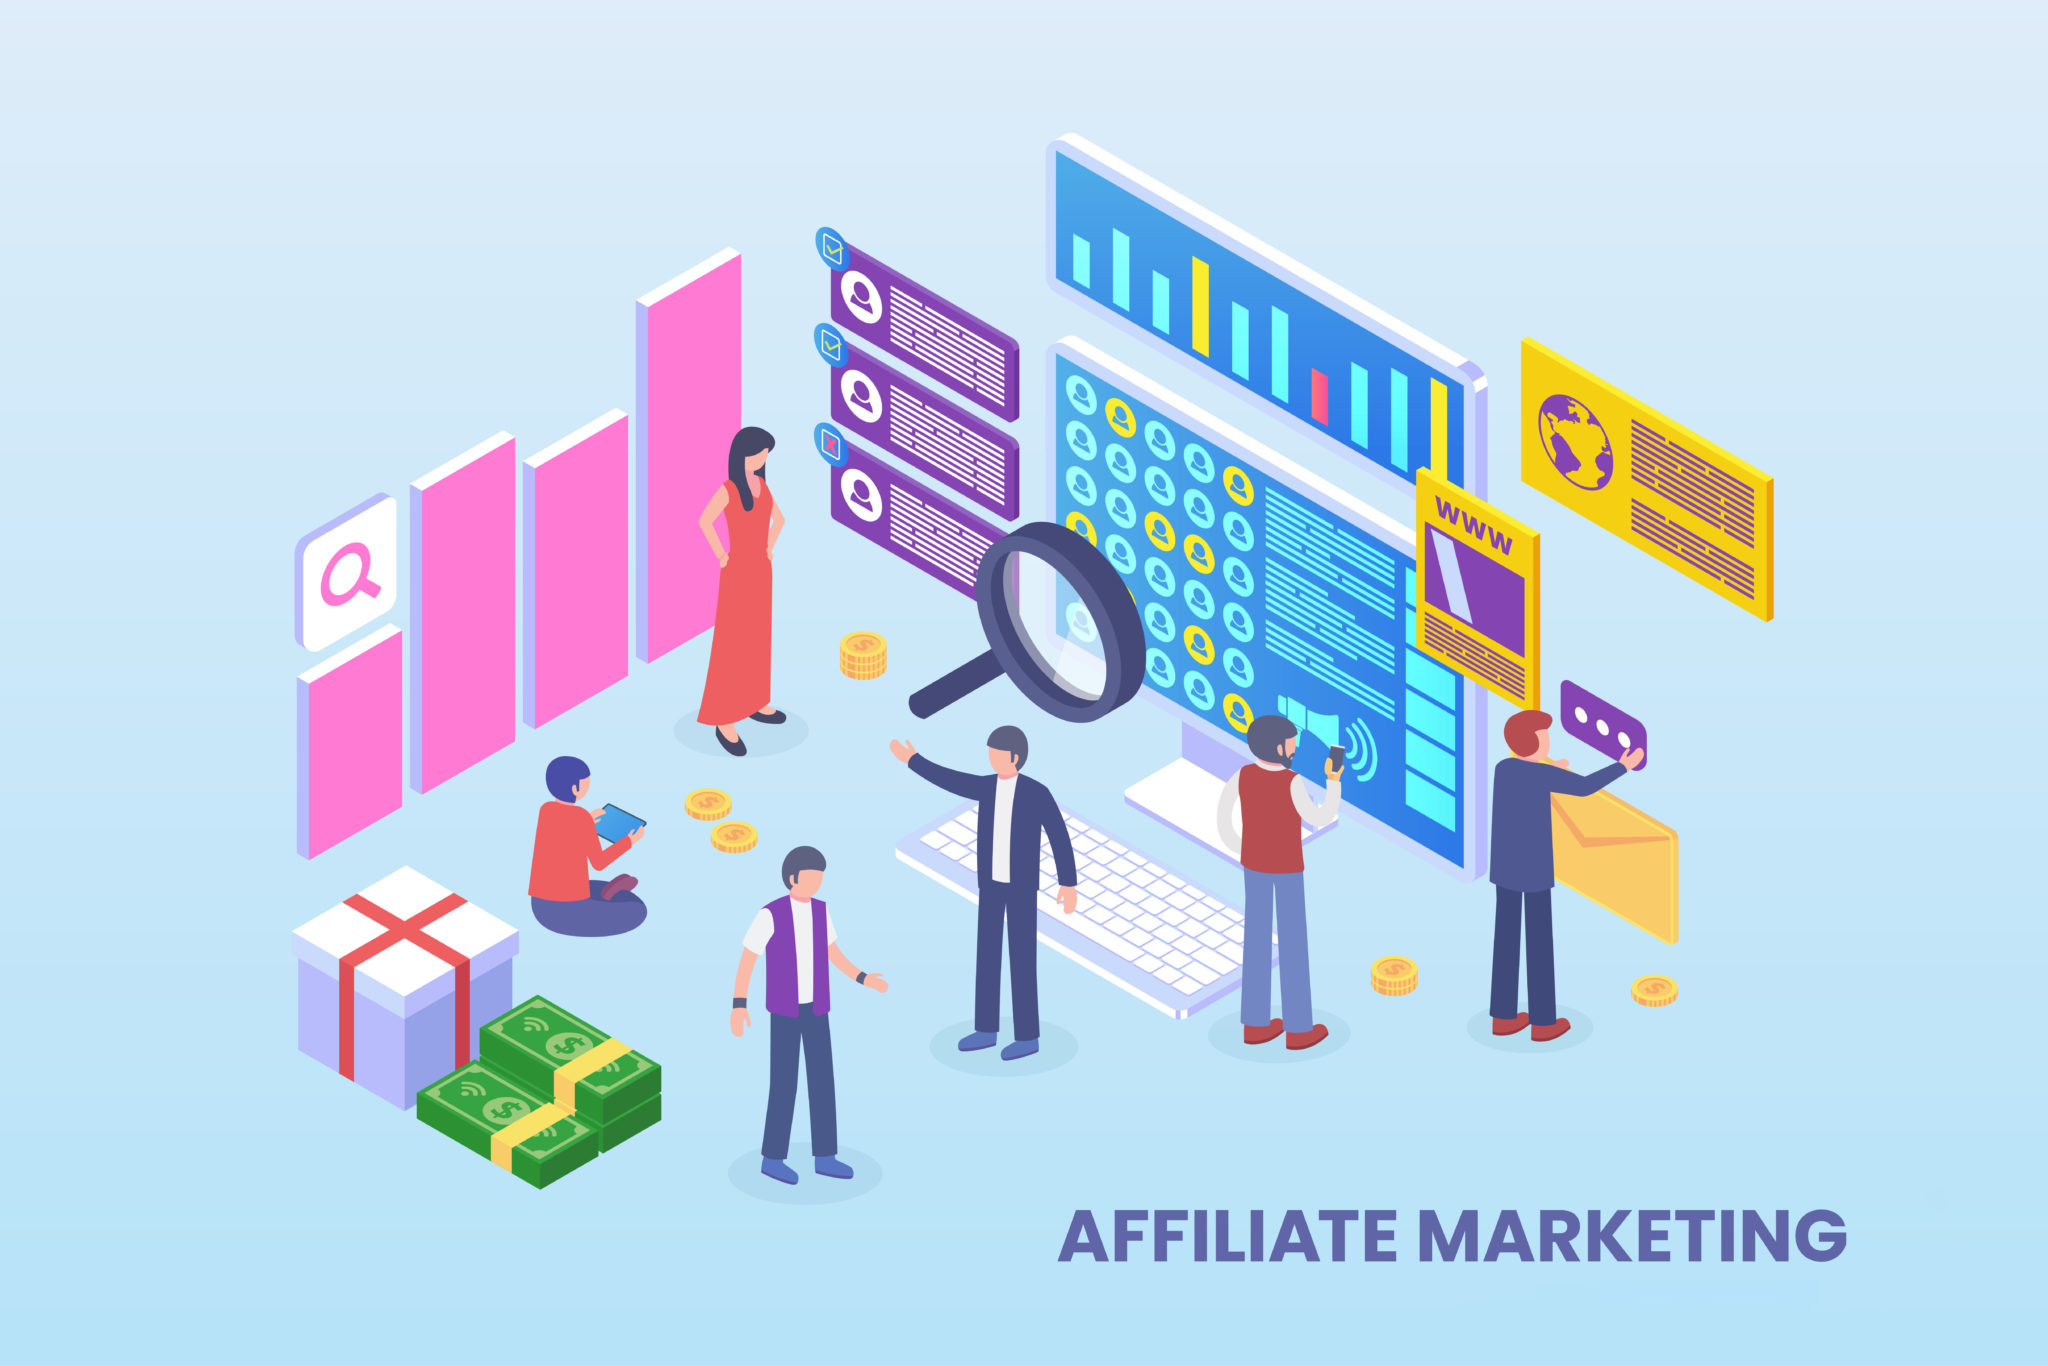 Learn all the secrets of Affiliate Marketing that nobody will share